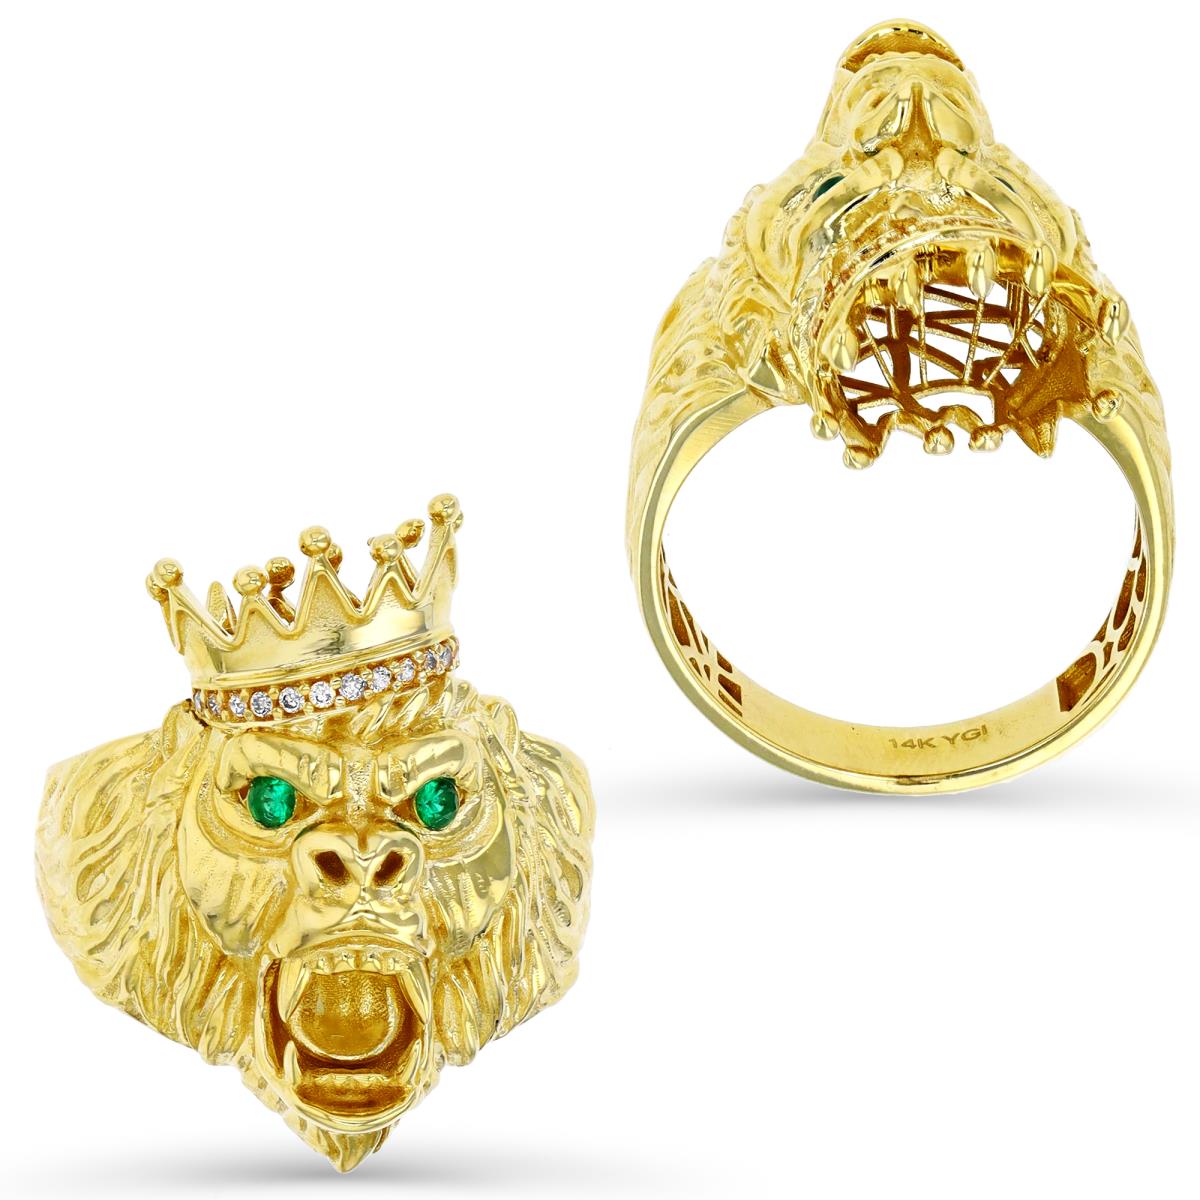 14K Gold Yellow 27MM Polished & Textured White & Green CZ King Lion Head Ring